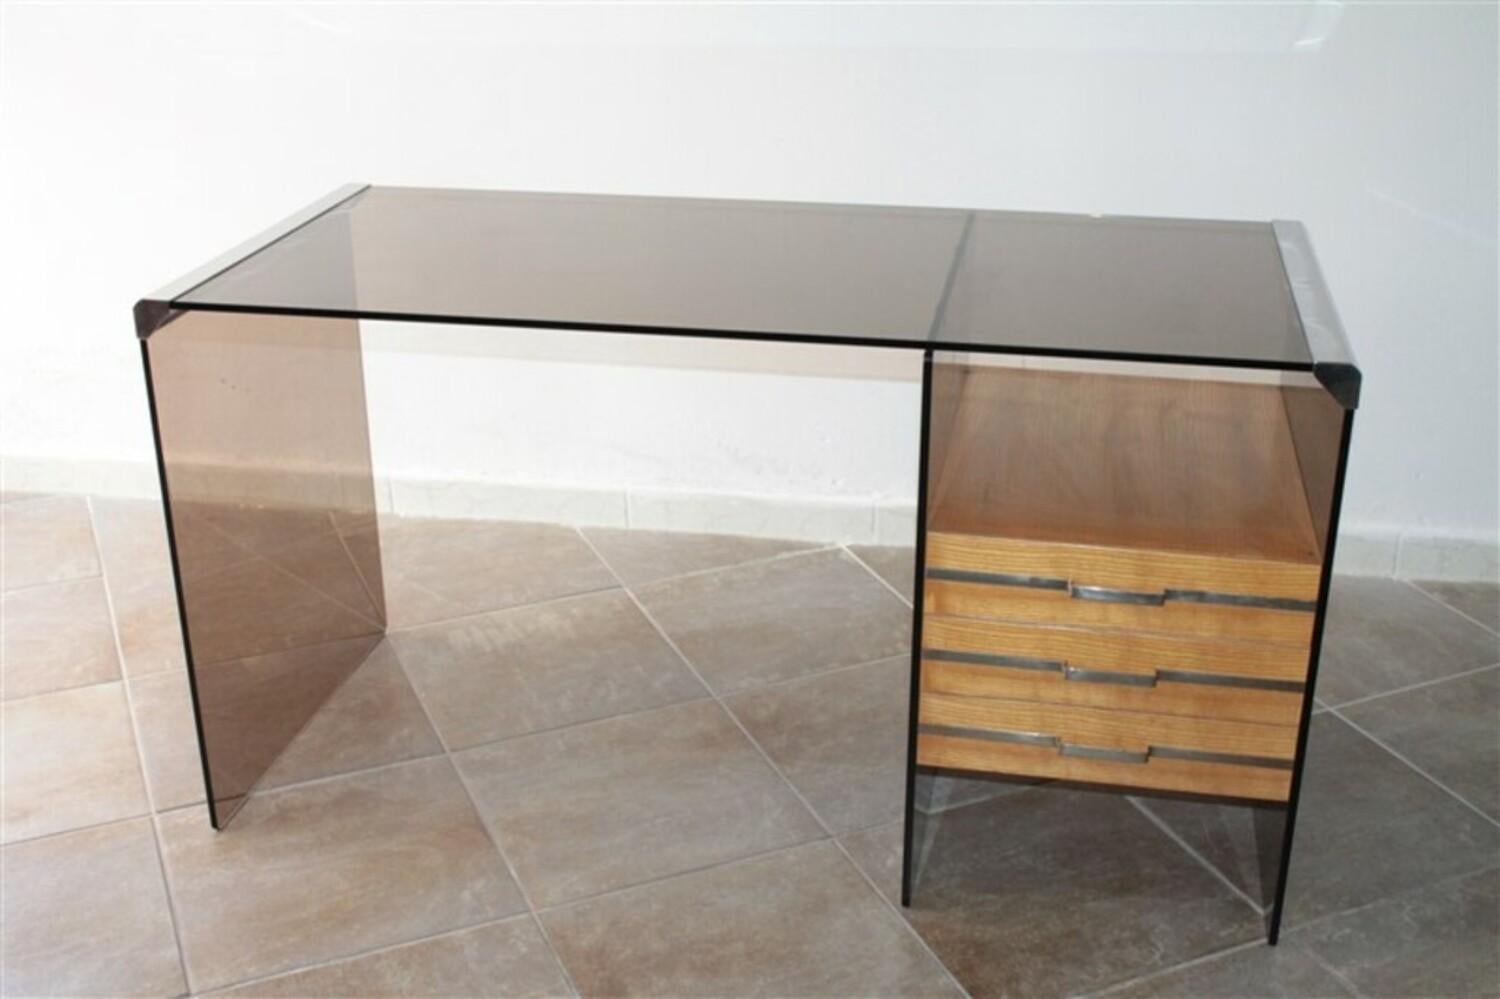 Rare desk 1970s grey glass with drawers by Gallotti & Radice.